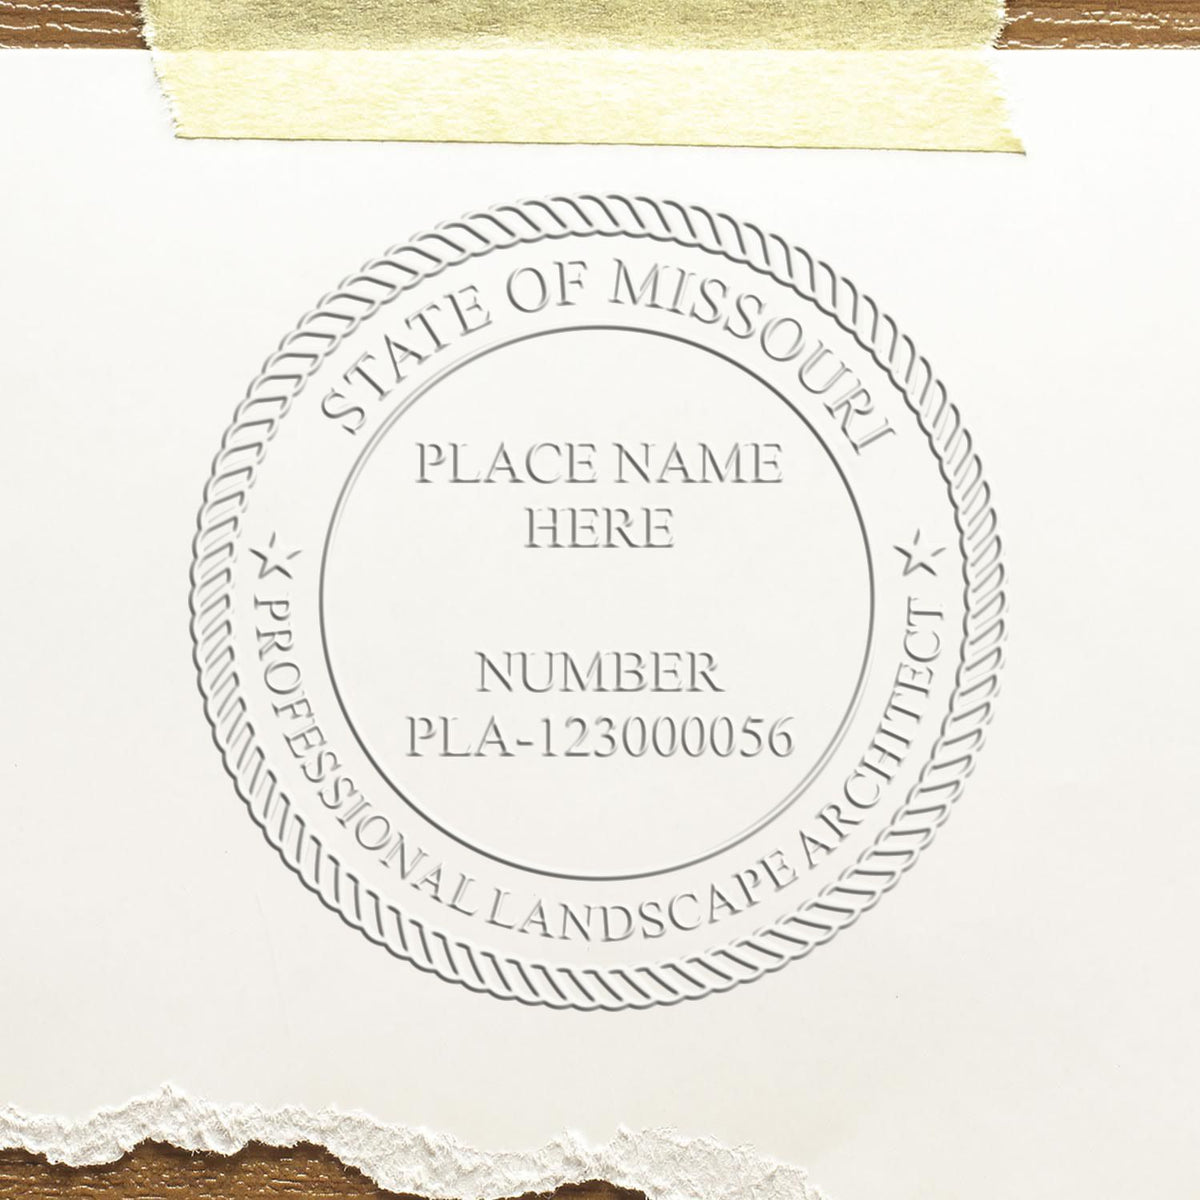 The Gift Missouri Landscape Architect Seal stamp impression comes to life with a crisp, detailed image stamped on paper - showcasing true professional quality.